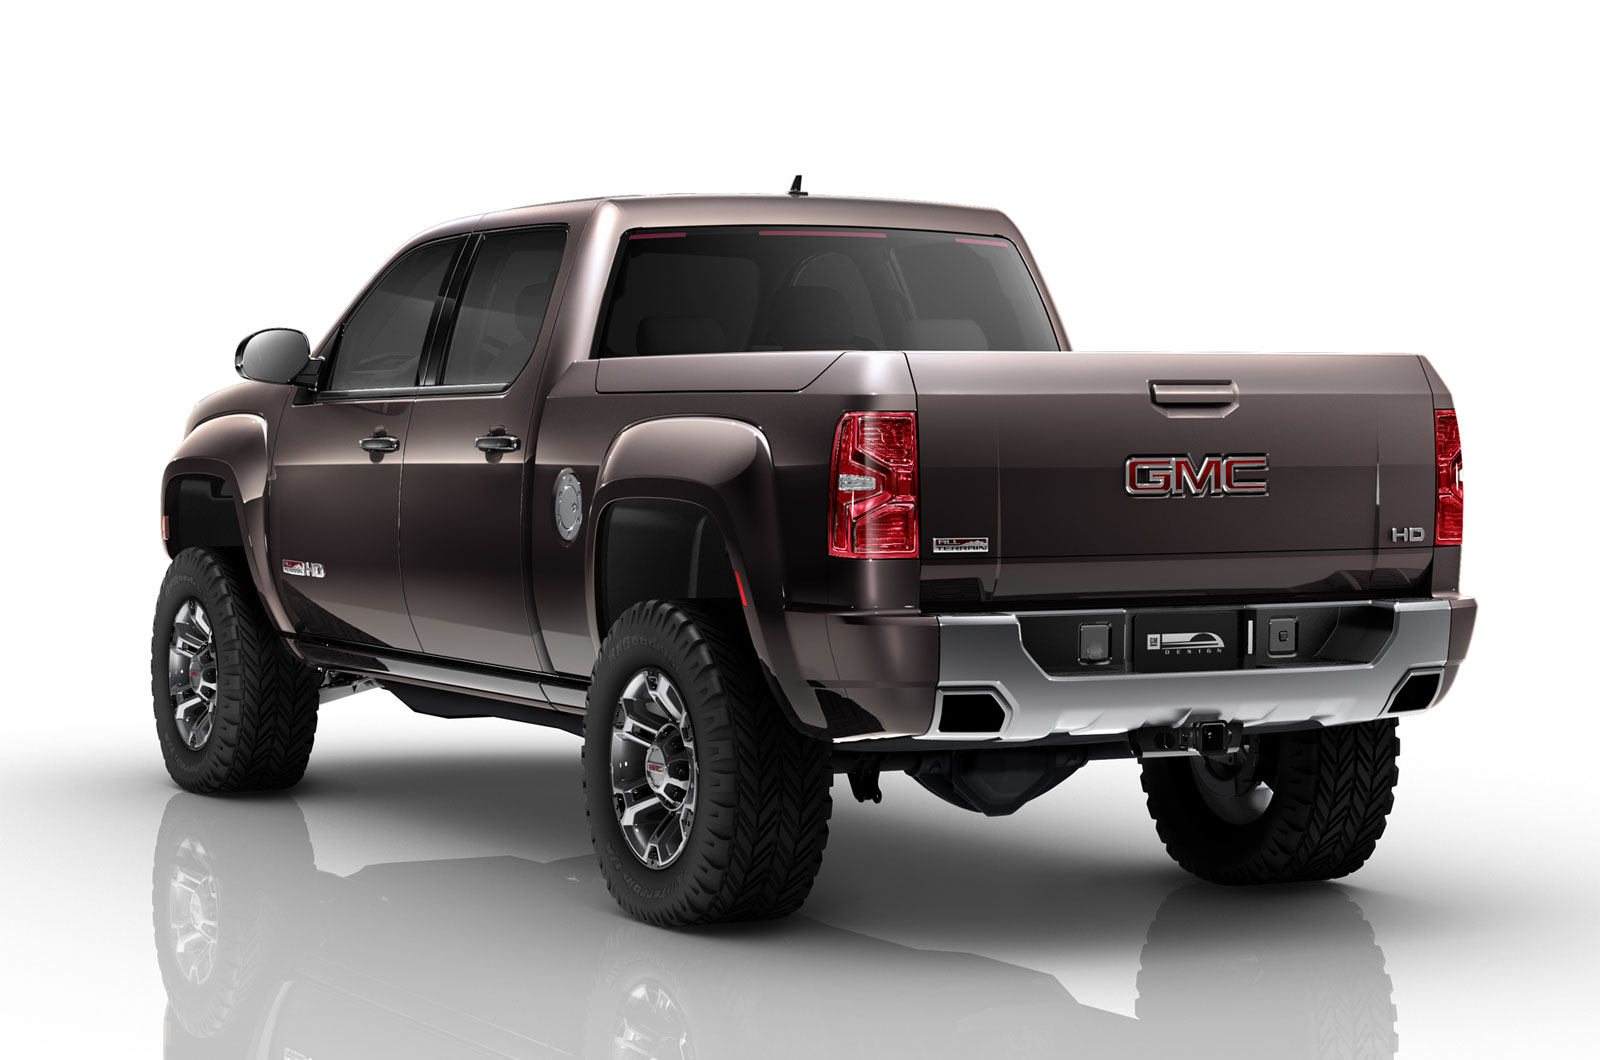 2013 GMC Sierra Review and Pictures | Car Review, Specification and ...